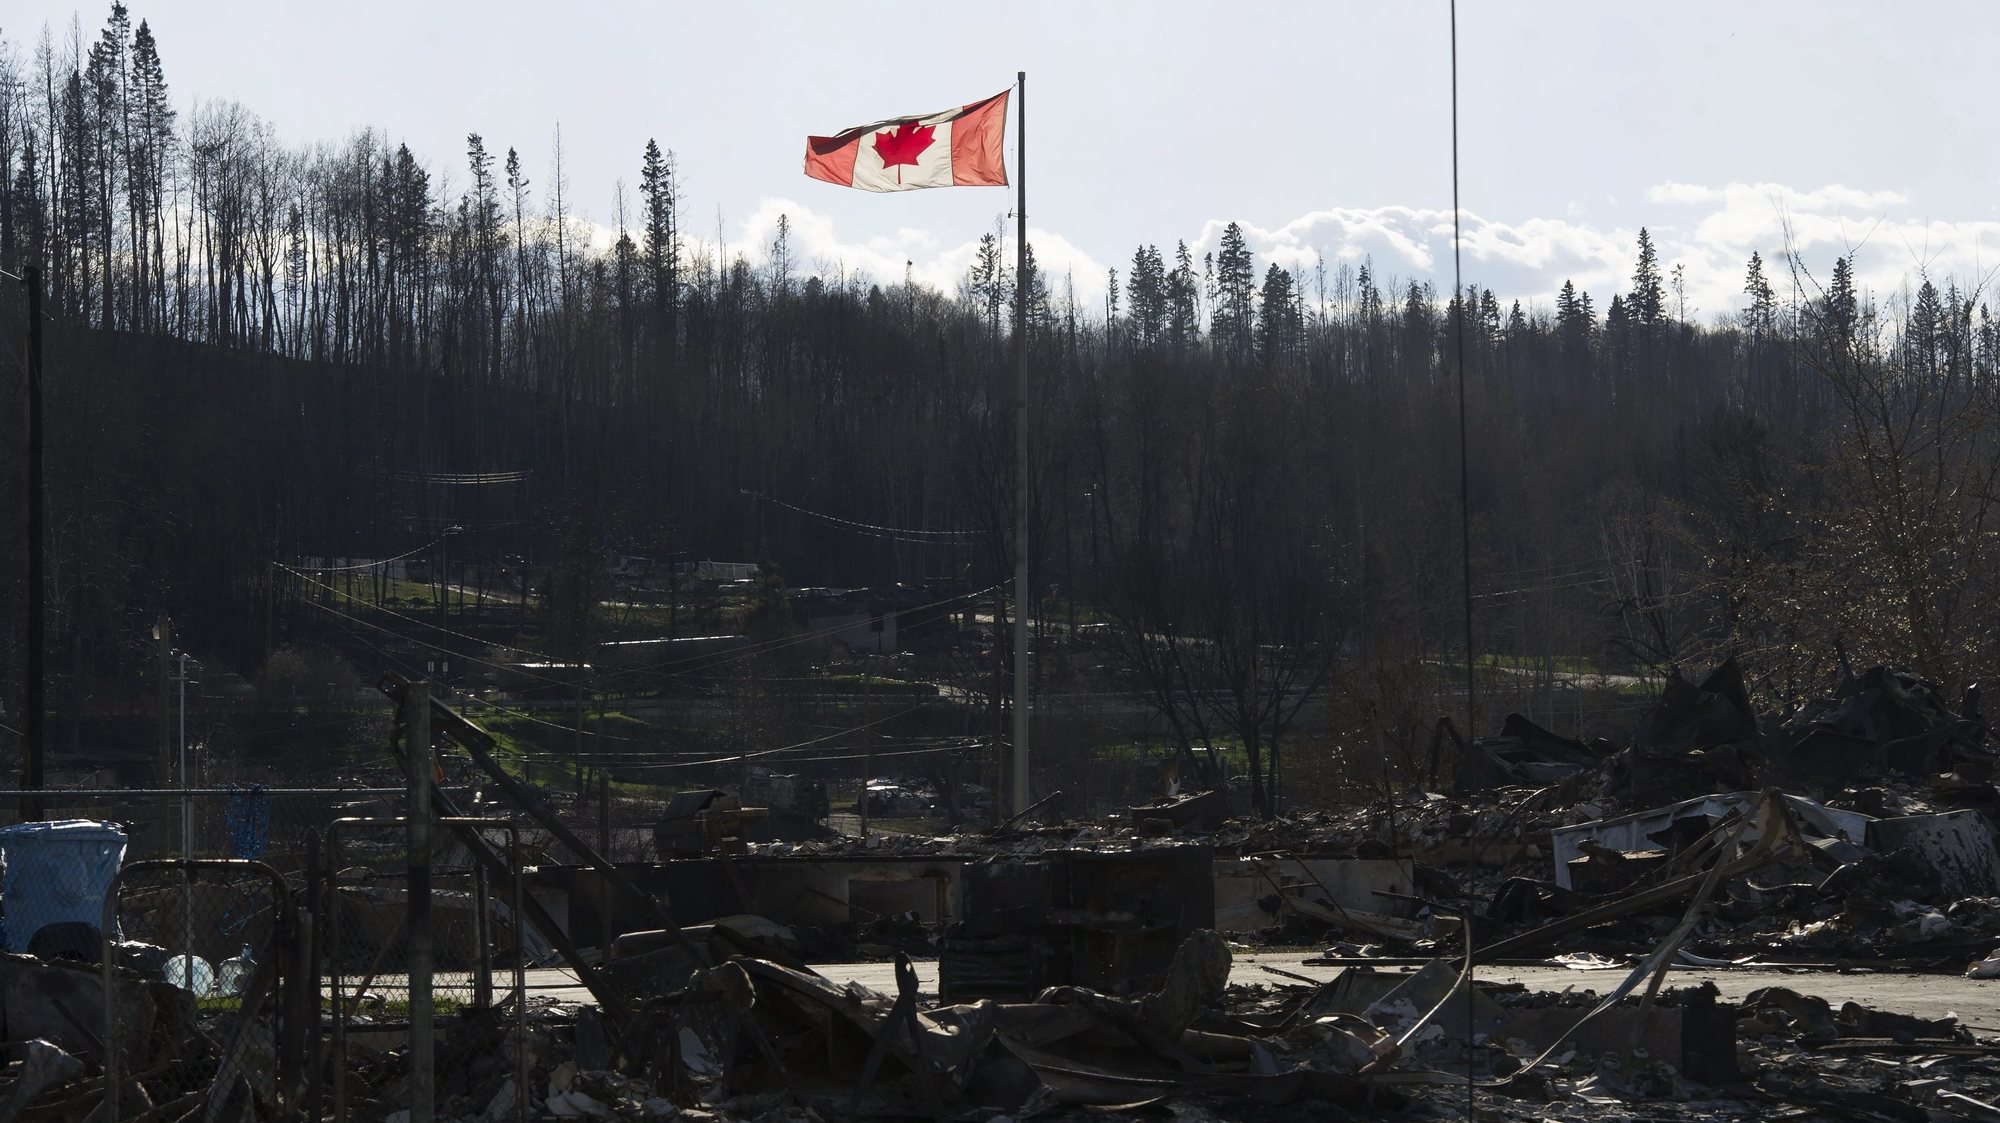 epa05309303 A handout picture made available by the Government of Alberta on 16 May 2016 shows a Canadian national flag flying over a general view of damage caused by a wildfire that swept through several neighbourhoods in Fort McMurray, Alberta, Canada, 14 May 2016. Alberta Health Services has issued an air-quality advisory for the Fort McMurray area. A wildfire erupted on 03 May destroying the city of Fort MacMurray, and forcing more than 88,000 people to evacuate from the area, leaving more than 200,000 hectares burnt. Government officials say that only heavy rain would extinguish the fire.  EPA/GOVERNMENT OF ALBERTA/CHRIS SCHWARZ  HANDOUT EDITORIAL USE ONLY